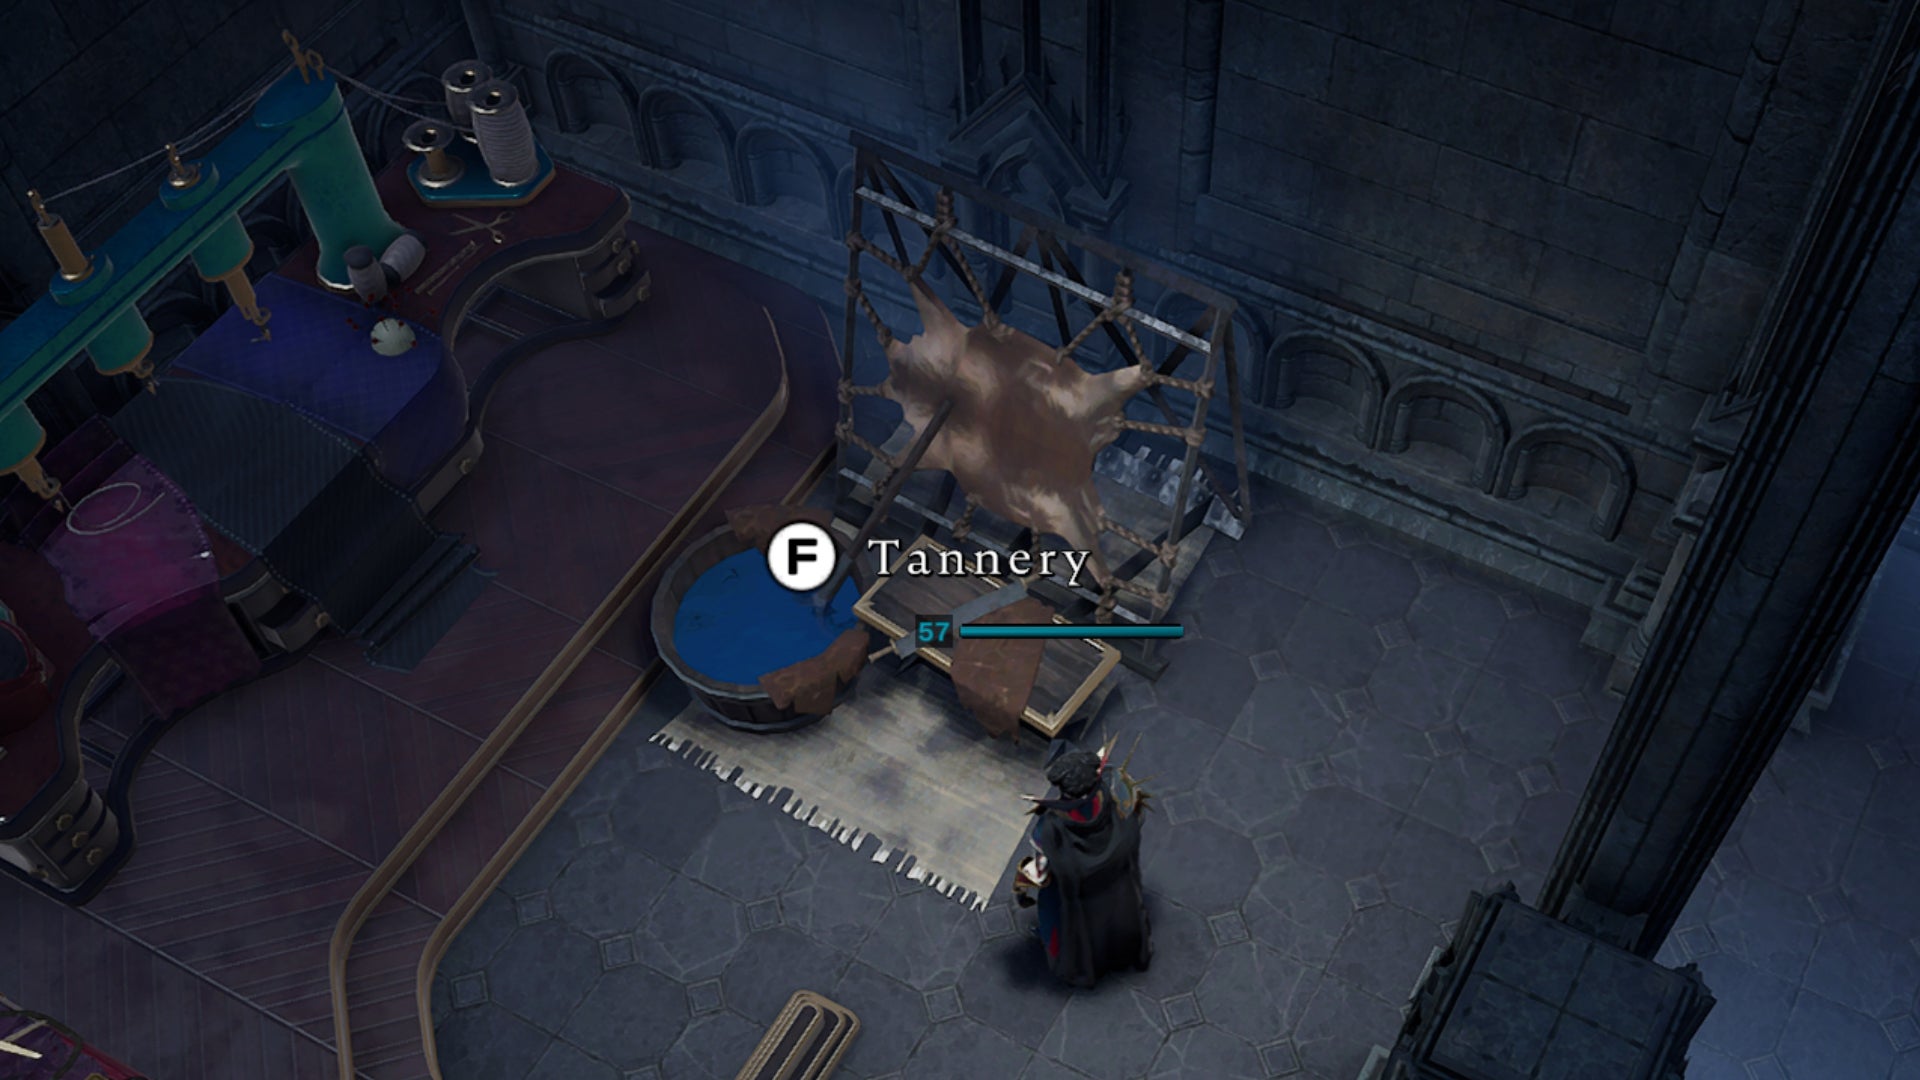 The player in V Rising stands next to a Tannery in their Castle.